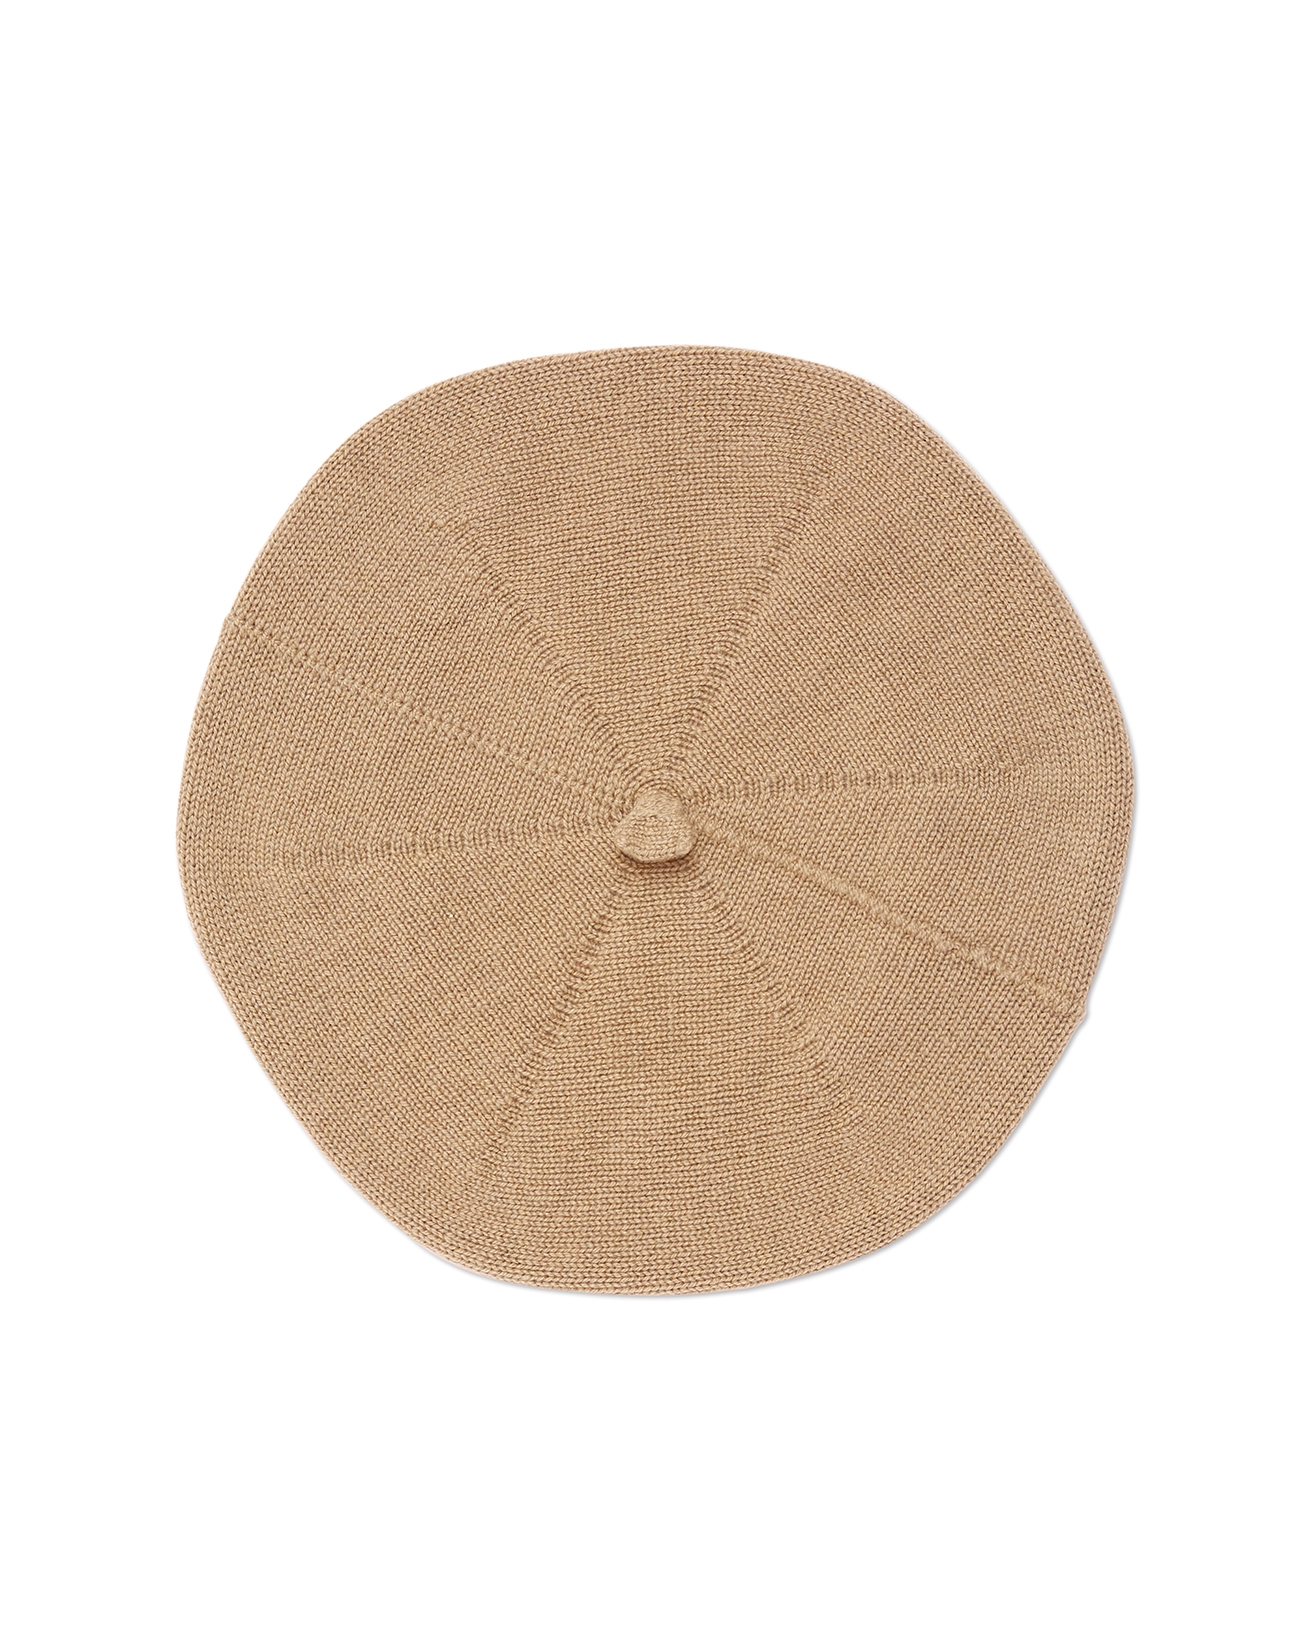 Cashmere Beret / One Size / Oatmeal